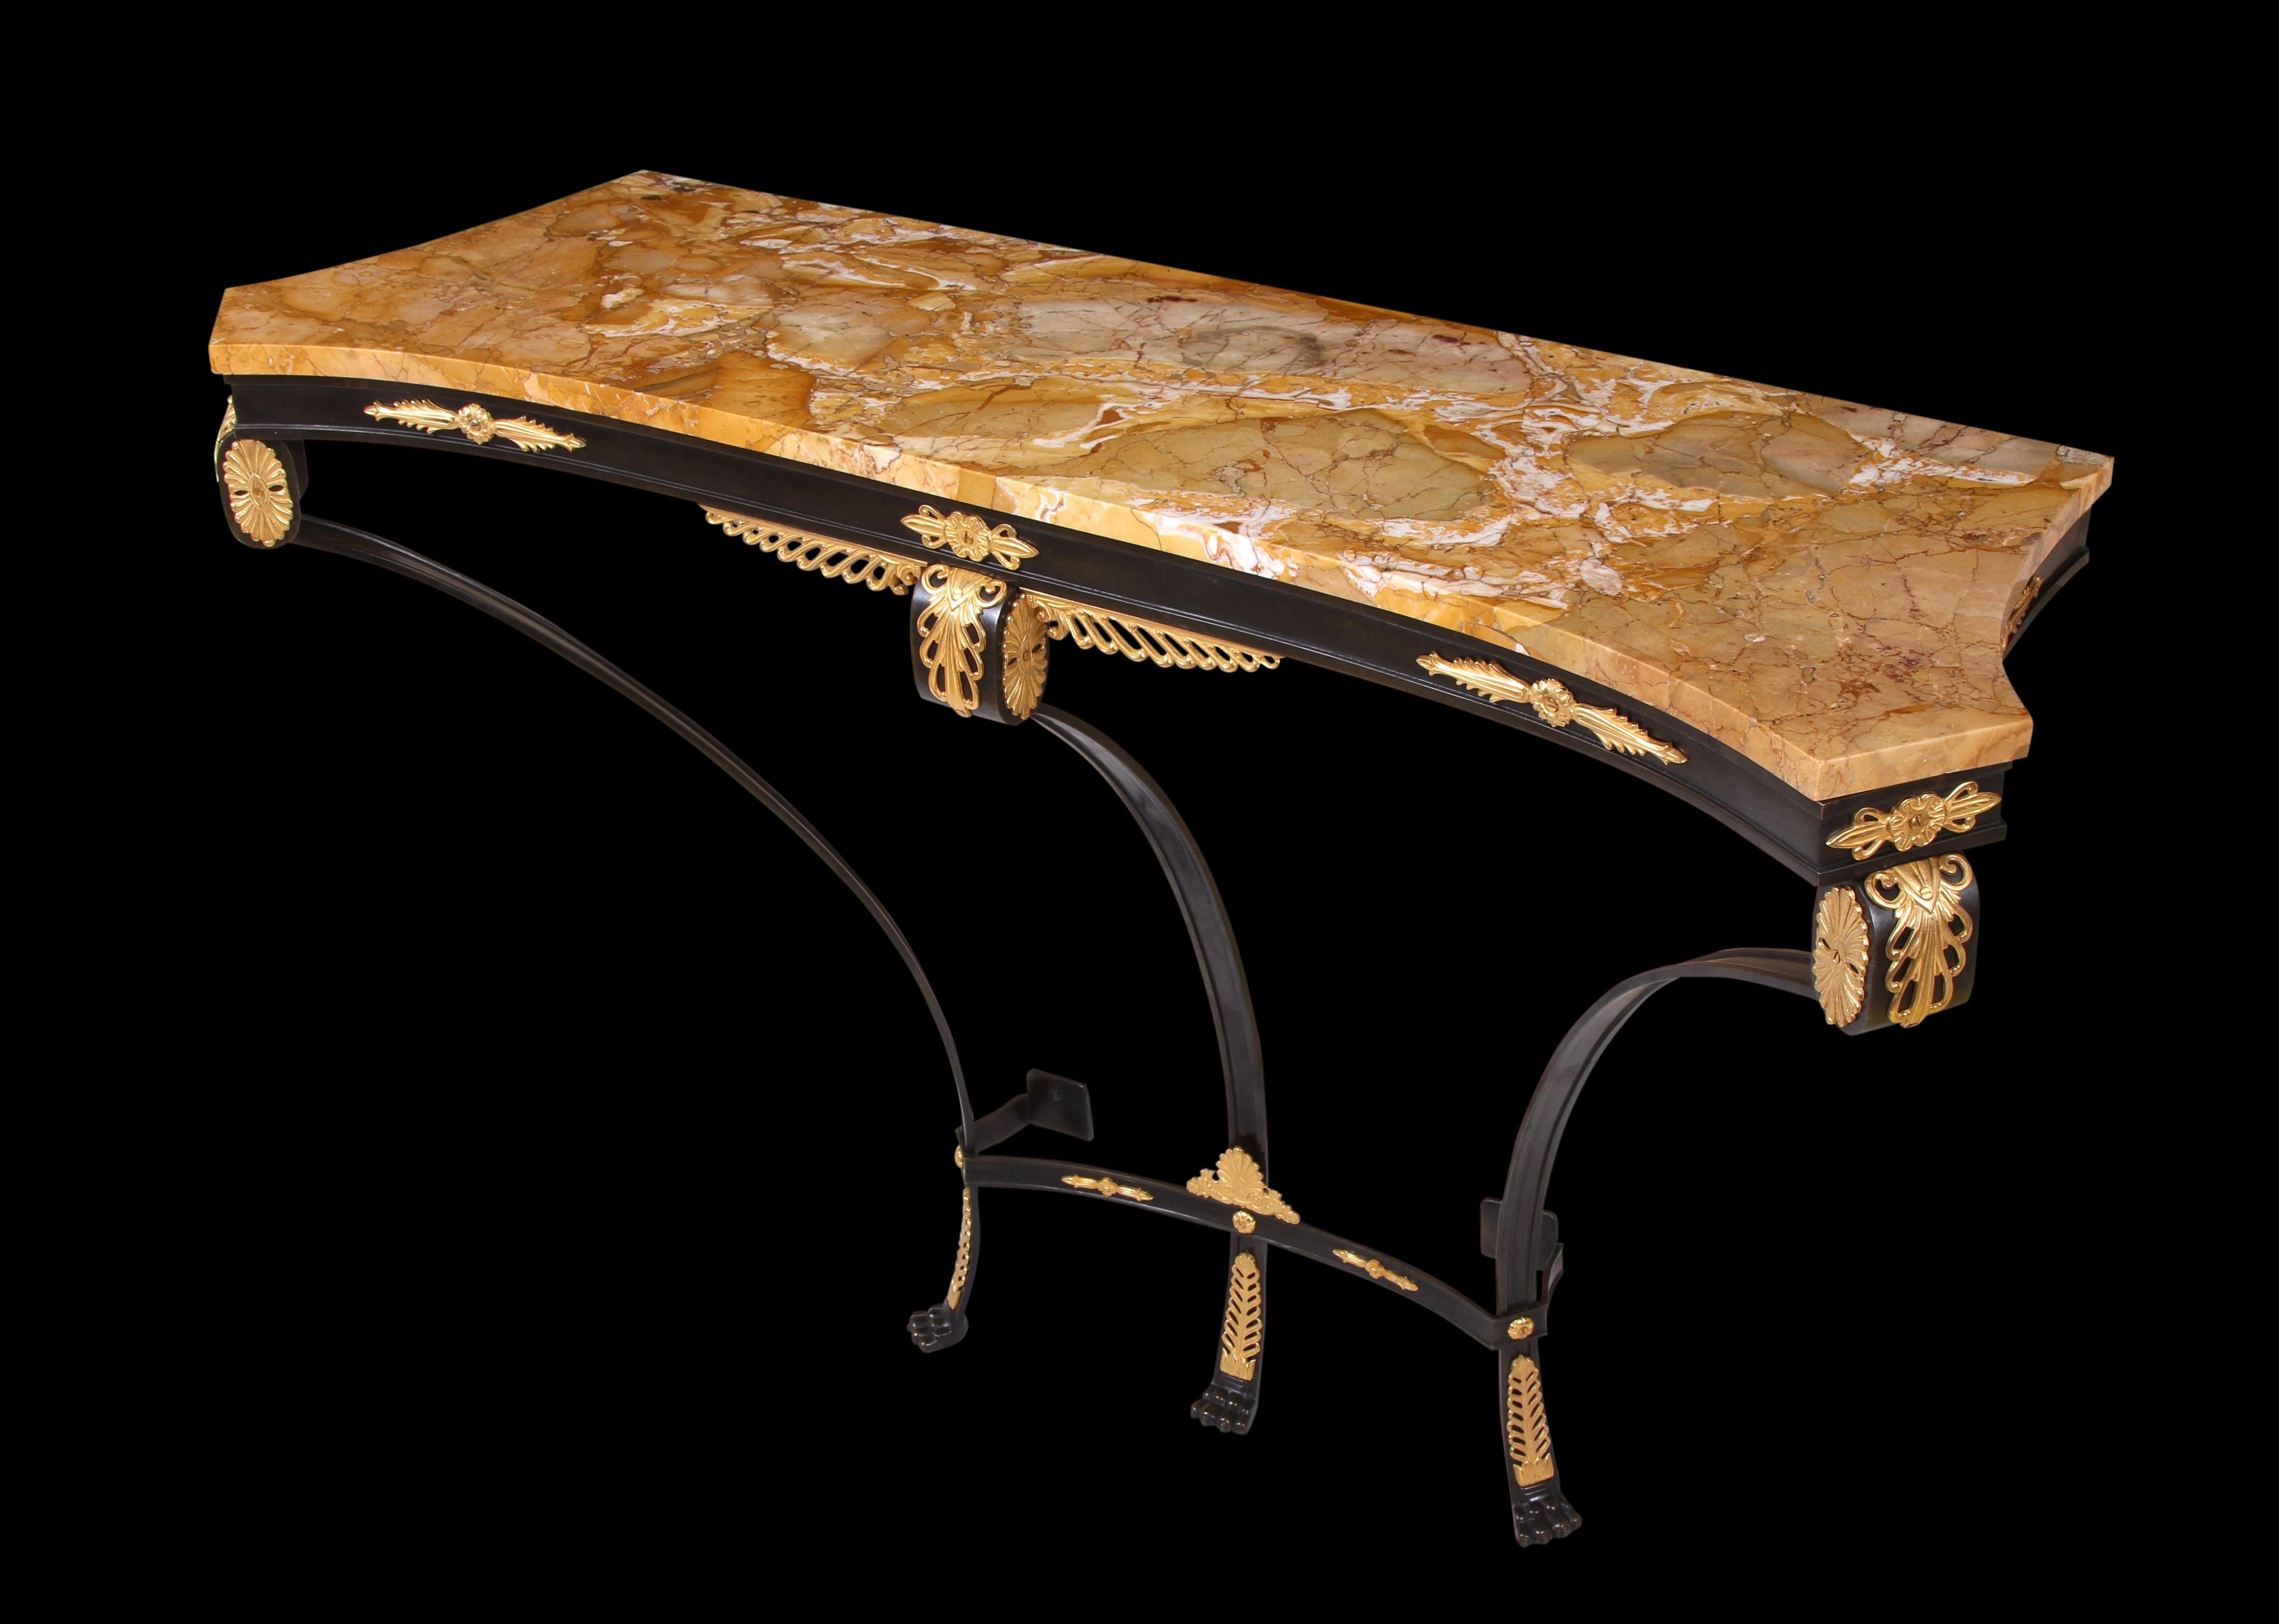 Sculpted from solid Bronze with a stunningly figured 46 inch solid Siena marble top

Rare Late 19th Century Patinated & Gilt Bronze Siena Marble Wall Mounted Hall Console Table. This incredibly beautiful neoclassical work of art exhibits a majestic